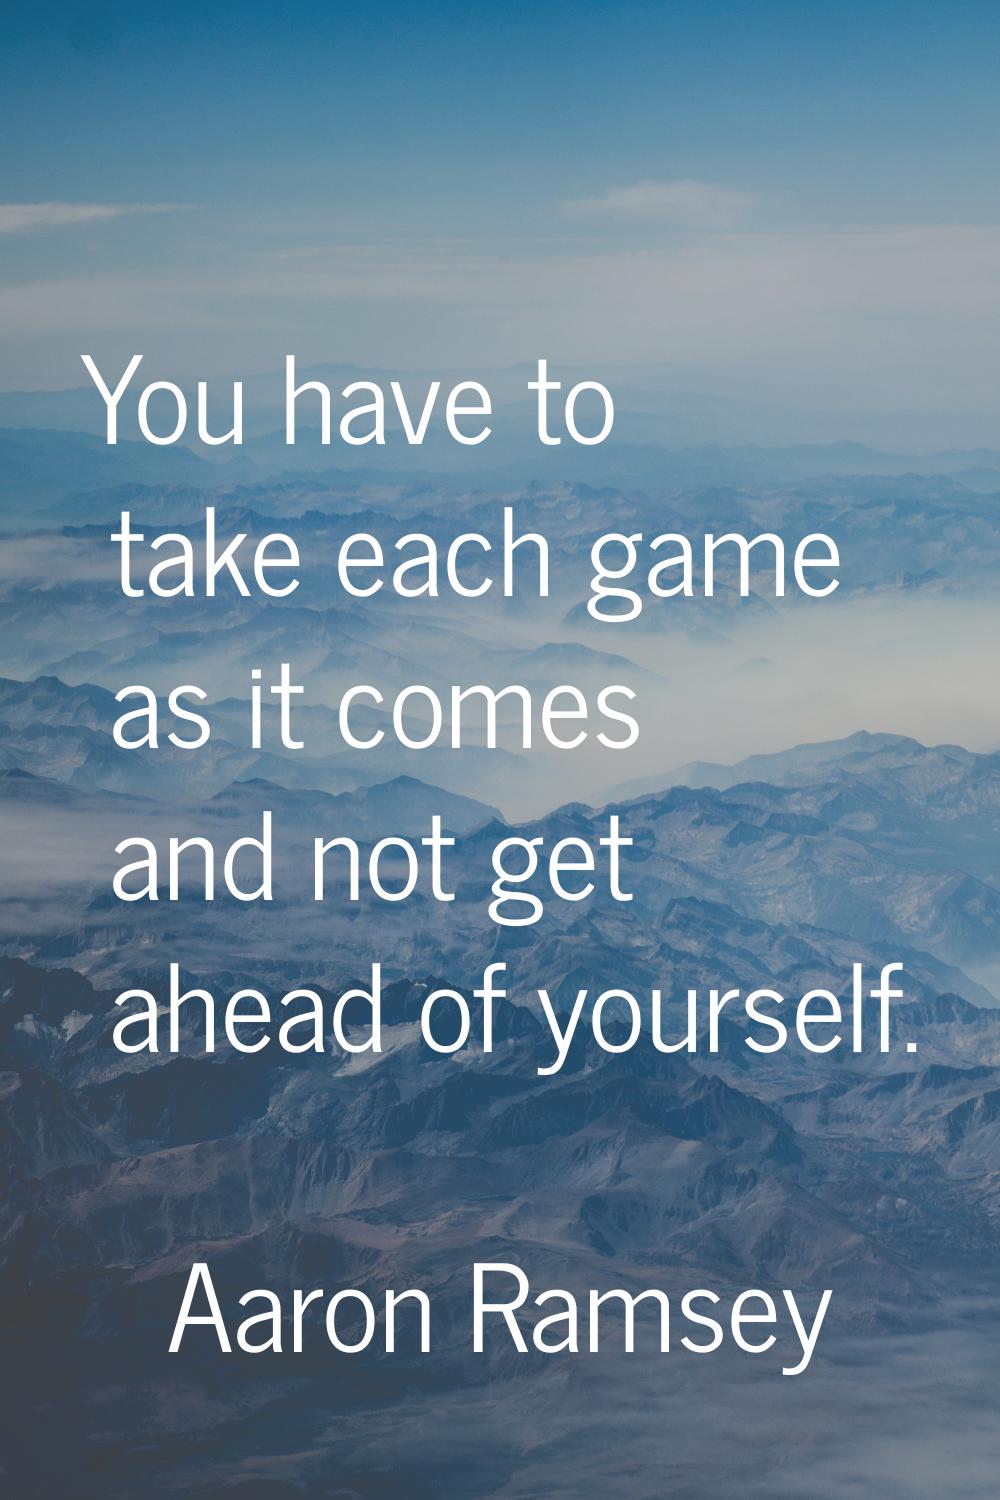 You have to take each game as it comes and not get ahead of yourself.